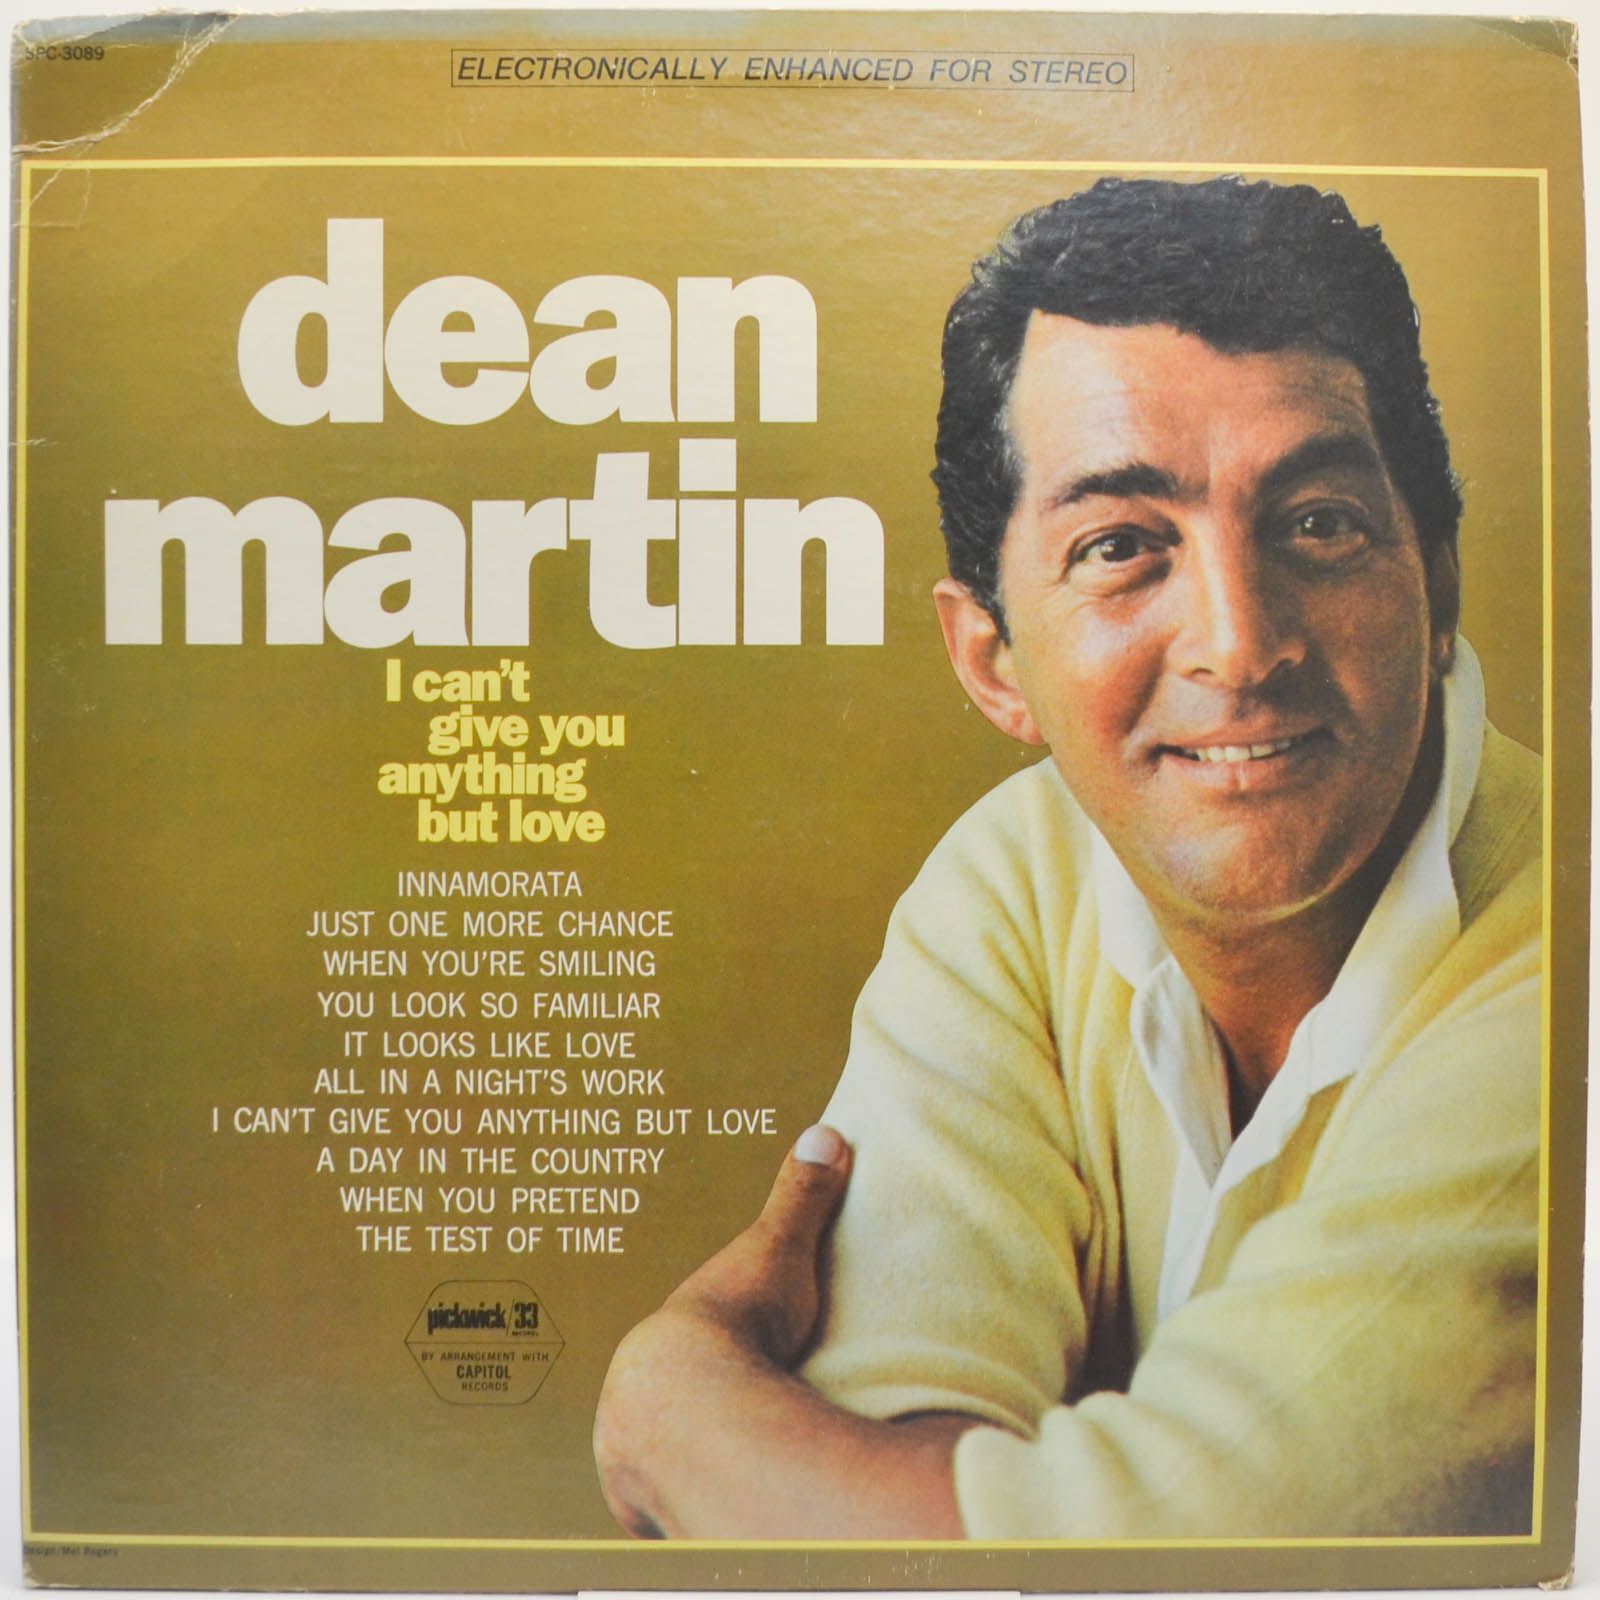 Dean Martin — I Can't Give You Anything But Love (USA), 1968